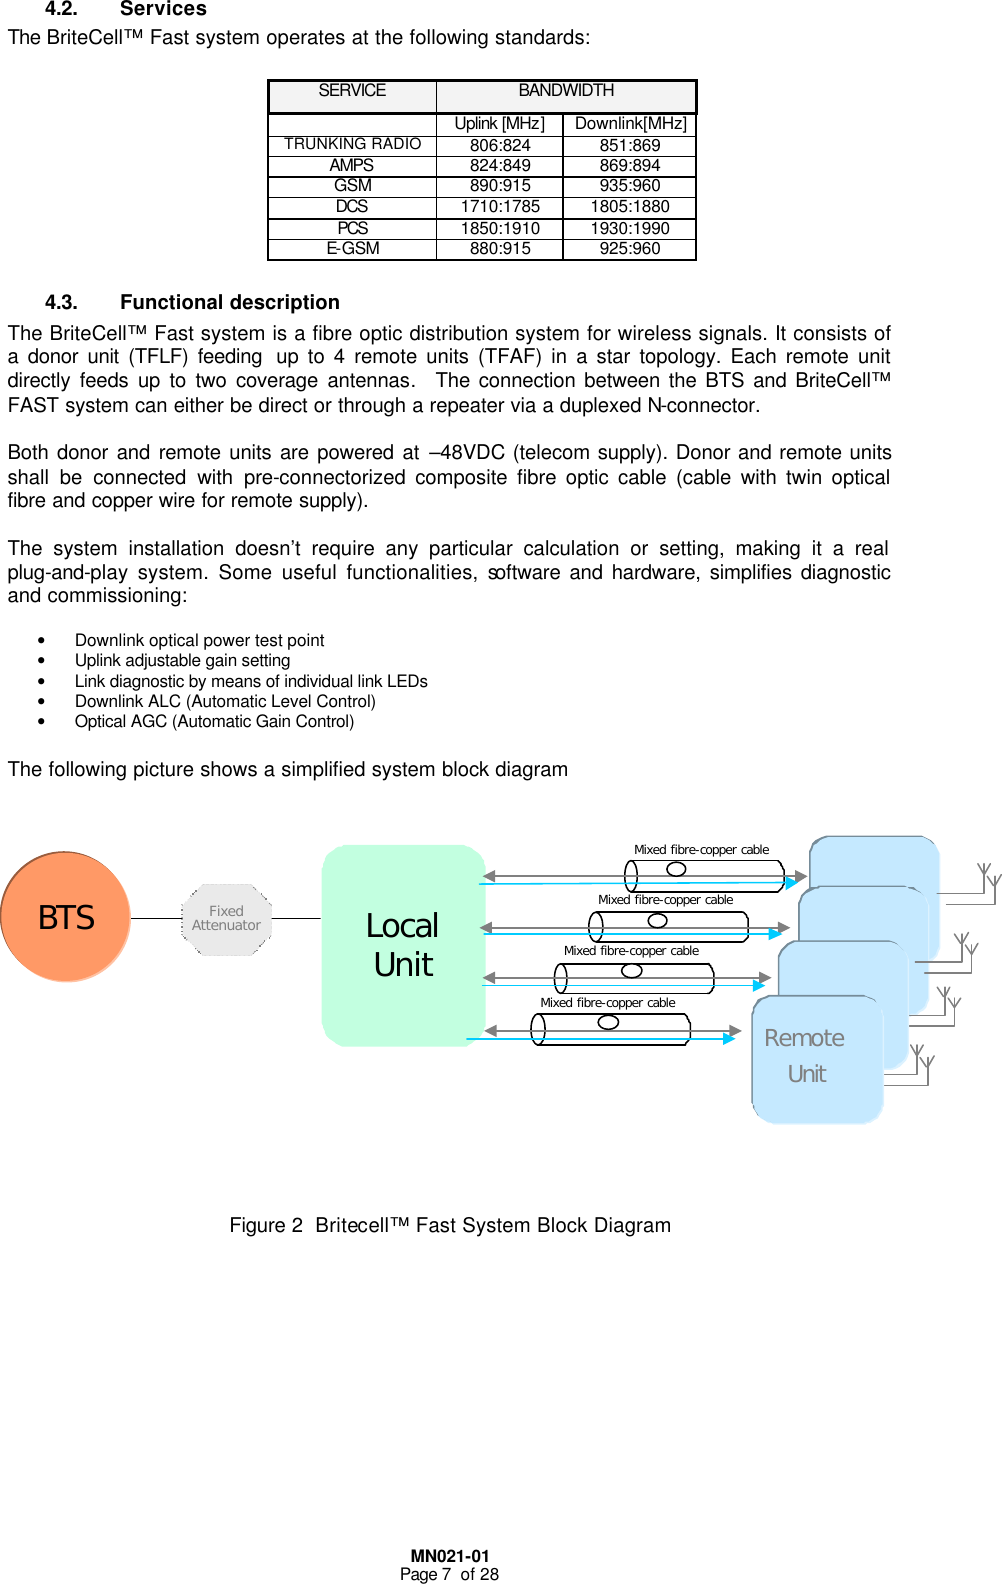  MN021-01 Page 7  of 28 4.2. Services The BriteCell™ Fast system operates at the following standards:          4.3. Functional description The BriteCell™ Fast system is a fibre optic distribution system for wireless signals. It consists of a donor unit (TFLF) feeding  up to 4 remote units (TFAF) in a star topology. Each remote unit directly feeds up to two coverage antennas.  The connection between the BTS and BriteCell™ FAST system can either be direct or through a repeater via a duplexed N-connector.  Both donor and remote units are powered at –48VDC (telecom supply). Donor and remote units shall be connected with pre-connectorized composite fibre optic cable (cable with twin optical fibre and copper wire for remote supply).   The system installation doesn’t require any particular calculation or setting, making it a real plug-and-play system. Some useful functionalities, software and hardware, simplifies diagnostic and commissioning:  • Downlink optical power test point • Uplink adjustable gain setting • Link diagnostic by means of individual link LEDs • Downlink ALC (Automatic Level Control)  • Optical AGC (Automatic Gain Control)  The following picture shows a simplified system block diagram                   Figure 2  Britecell™ Fast System Block Diagram SERVICE BANDWIDTH  Uplink [MHz] Downlink[MHz] TRUNKING RADIO 806:824 851:869 AMPS 824:849 869:894 GSM 890:915 935:960 DCS 1710:1785 1805:1880 PCS 1850:1910 1930:1990 E-GSM 880:915 925:960  BTS Local Unit Mixed fibre-copper cable Unit Remote Unit Mixed fibre-copper cable Mixed fibre-copper cable Mixed fibre-copper cable Fixed Attenuator 